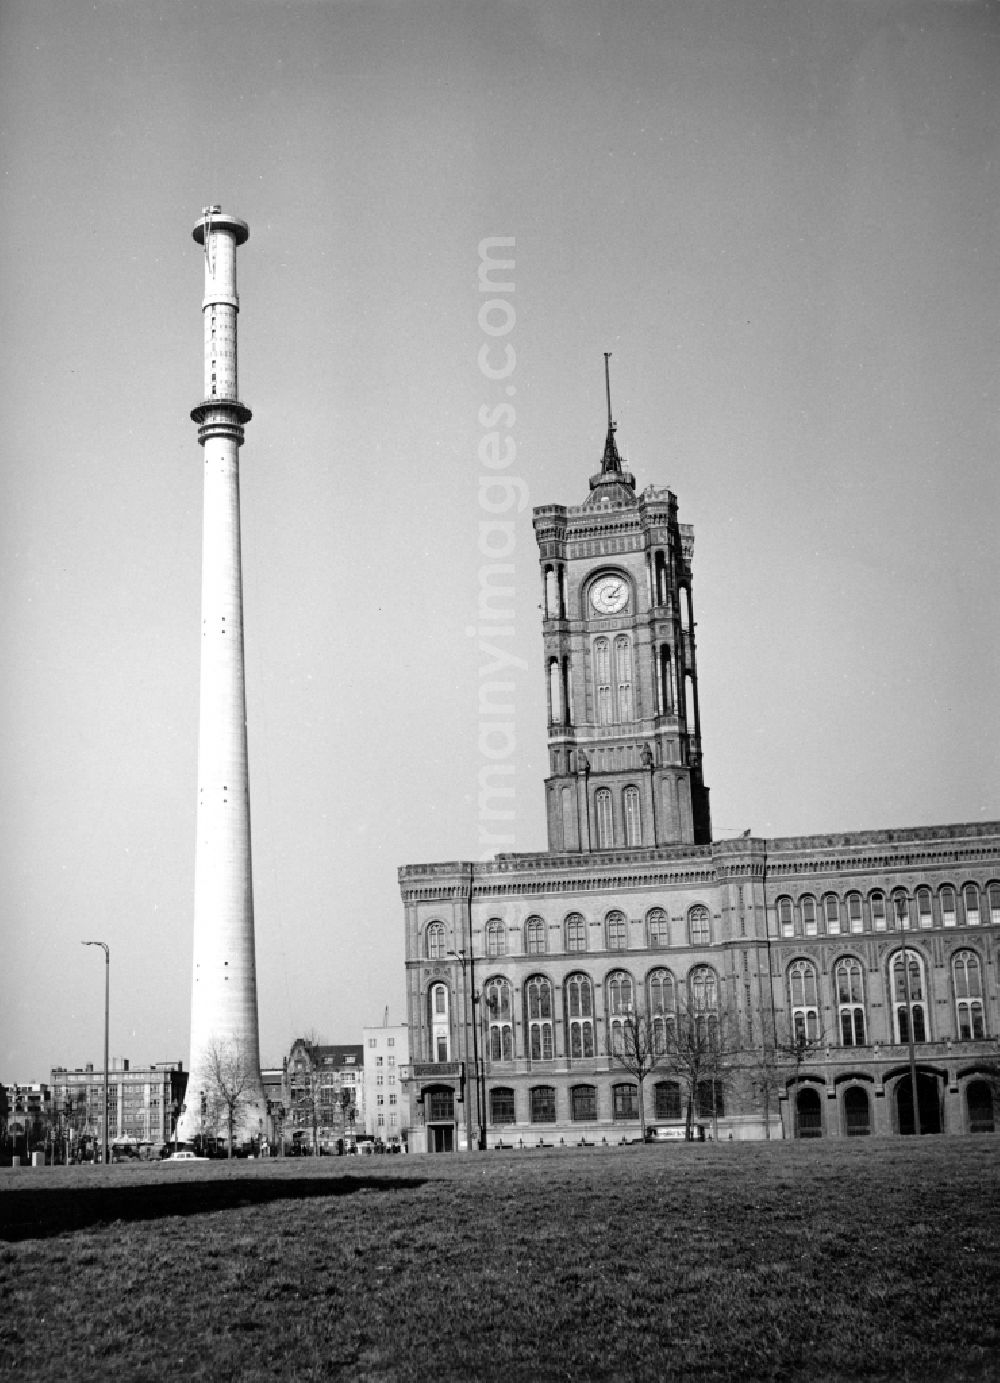 GDR picture archive: Berlin - Berliner Fernsehturm in the phase of the shell construction as a striking tower structure against the Red townhall in the district Mitte in Berlin, the former capital of the GDR, German Democratic Republic